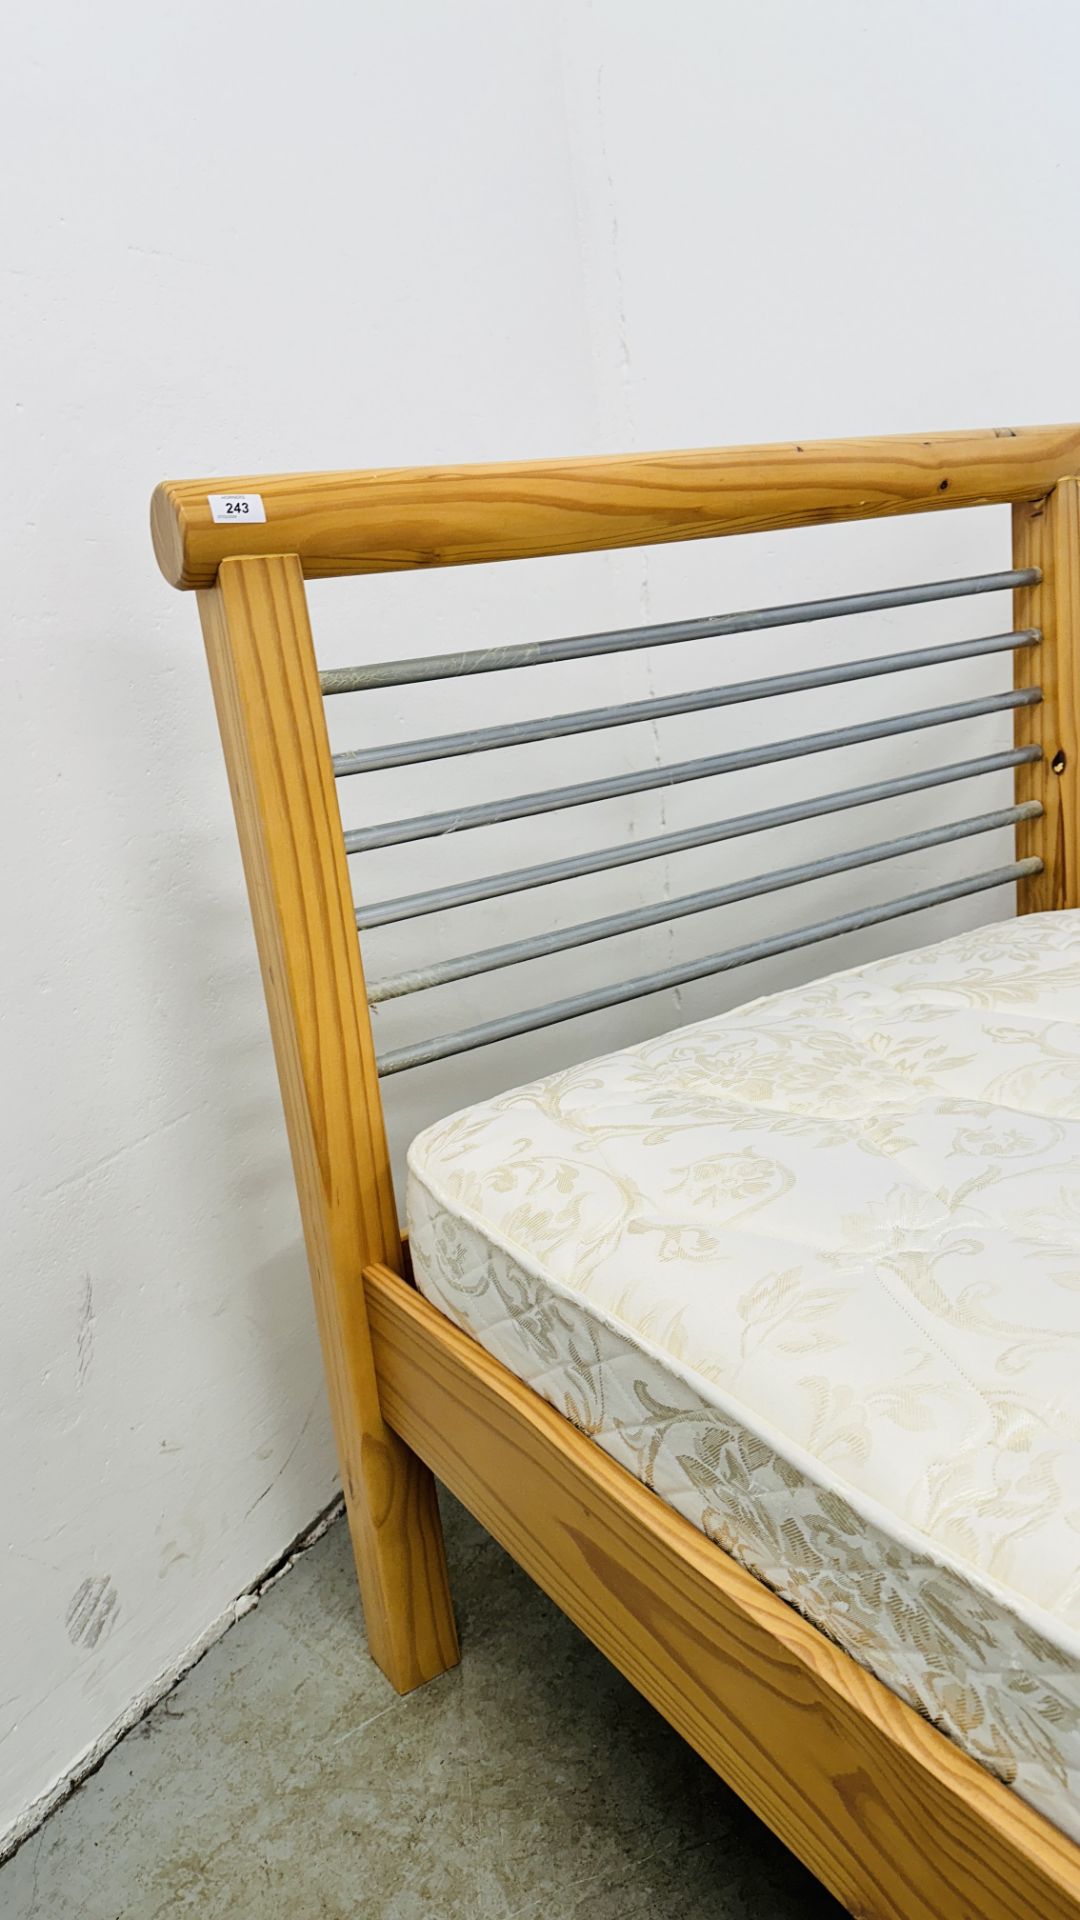 A MODERN PINE FRAMED SINGLE BED WITH STAINLESS STEEL BAR HEADBOARD COMPLETE WITH DORLUX FLEXIFORM - Image 3 of 7